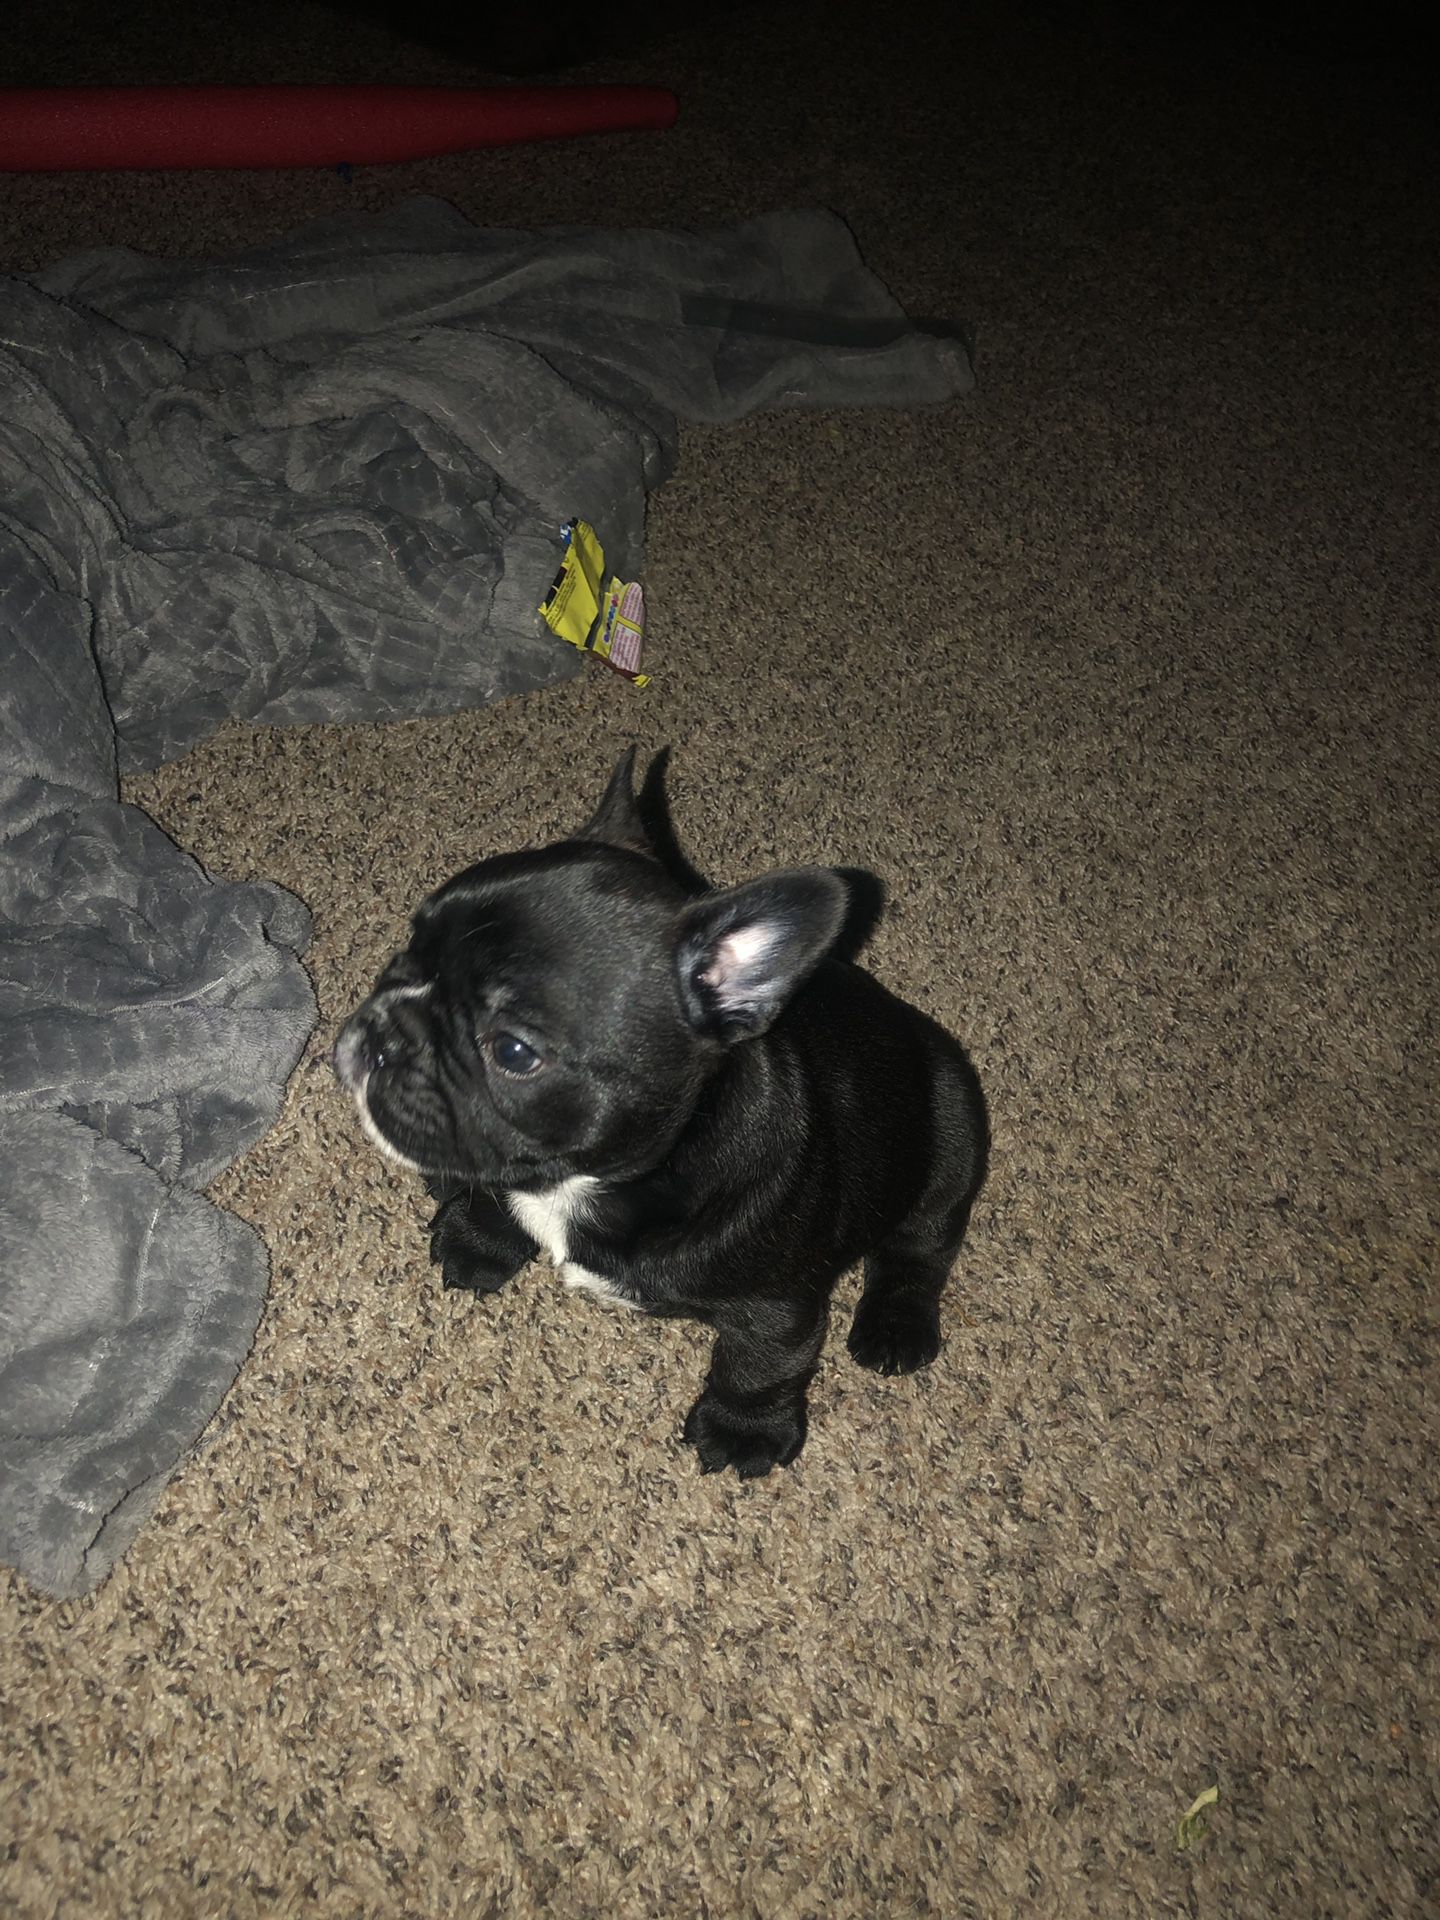 Coach French Bulldog keychain for Sale in Portland, OR - OfferUp